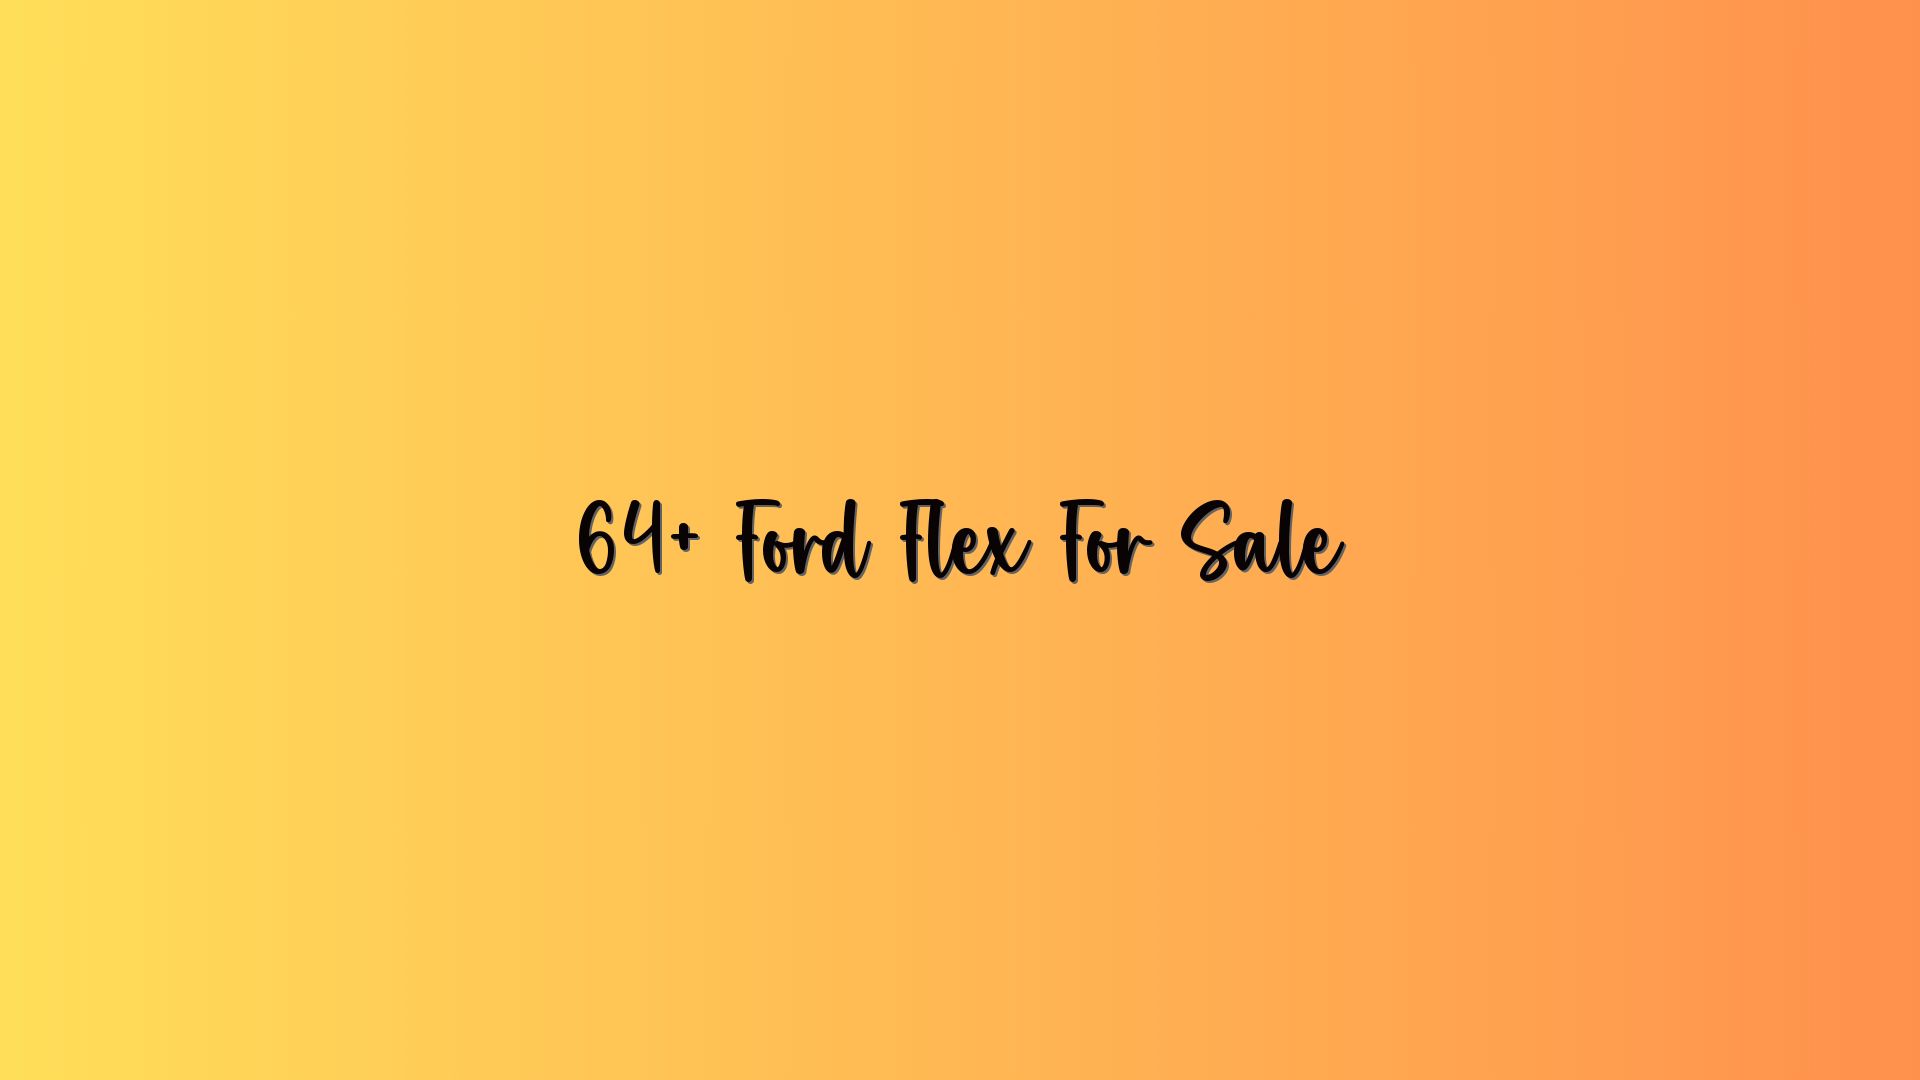 64+ Ford Flex For Sale